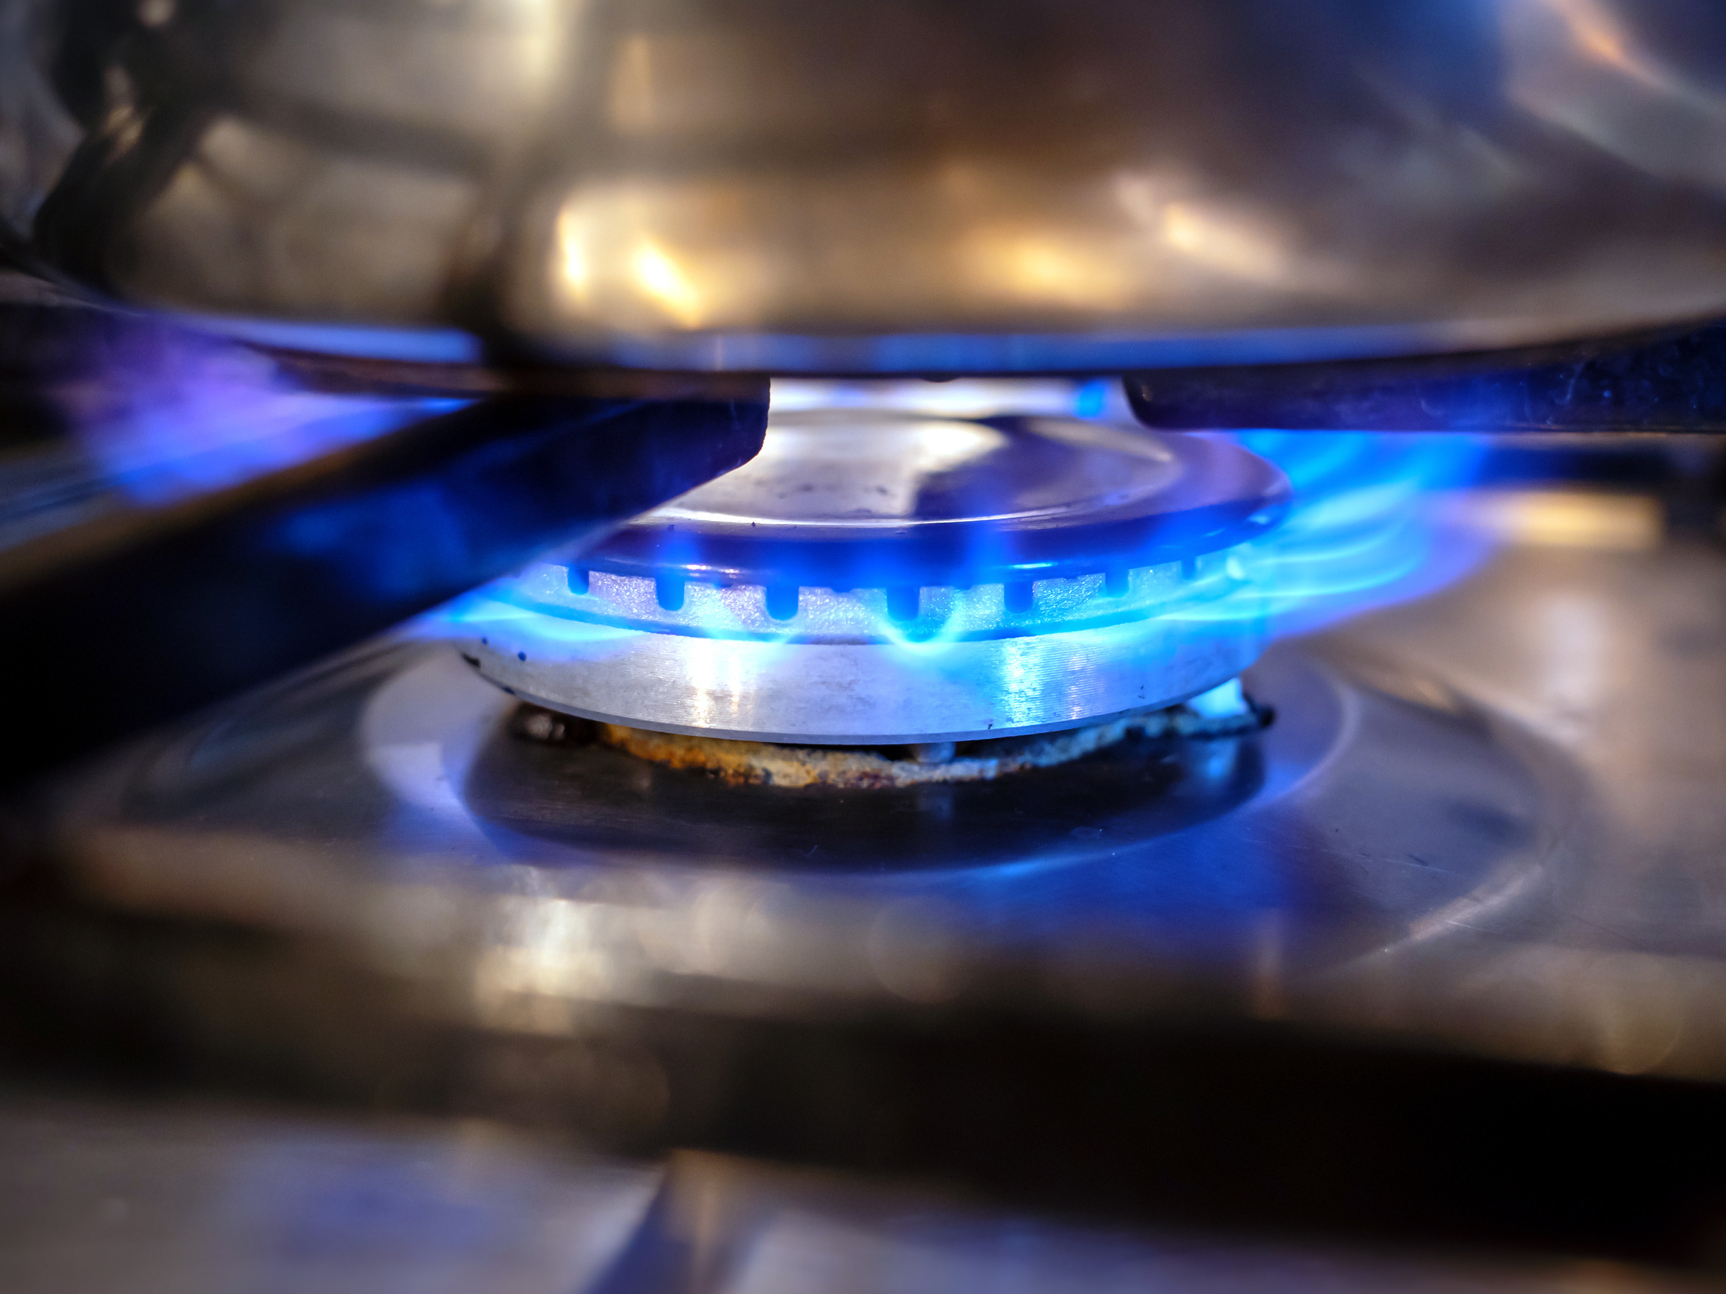 Gas stove makers have a pollution solution. They're just not using it - OPB